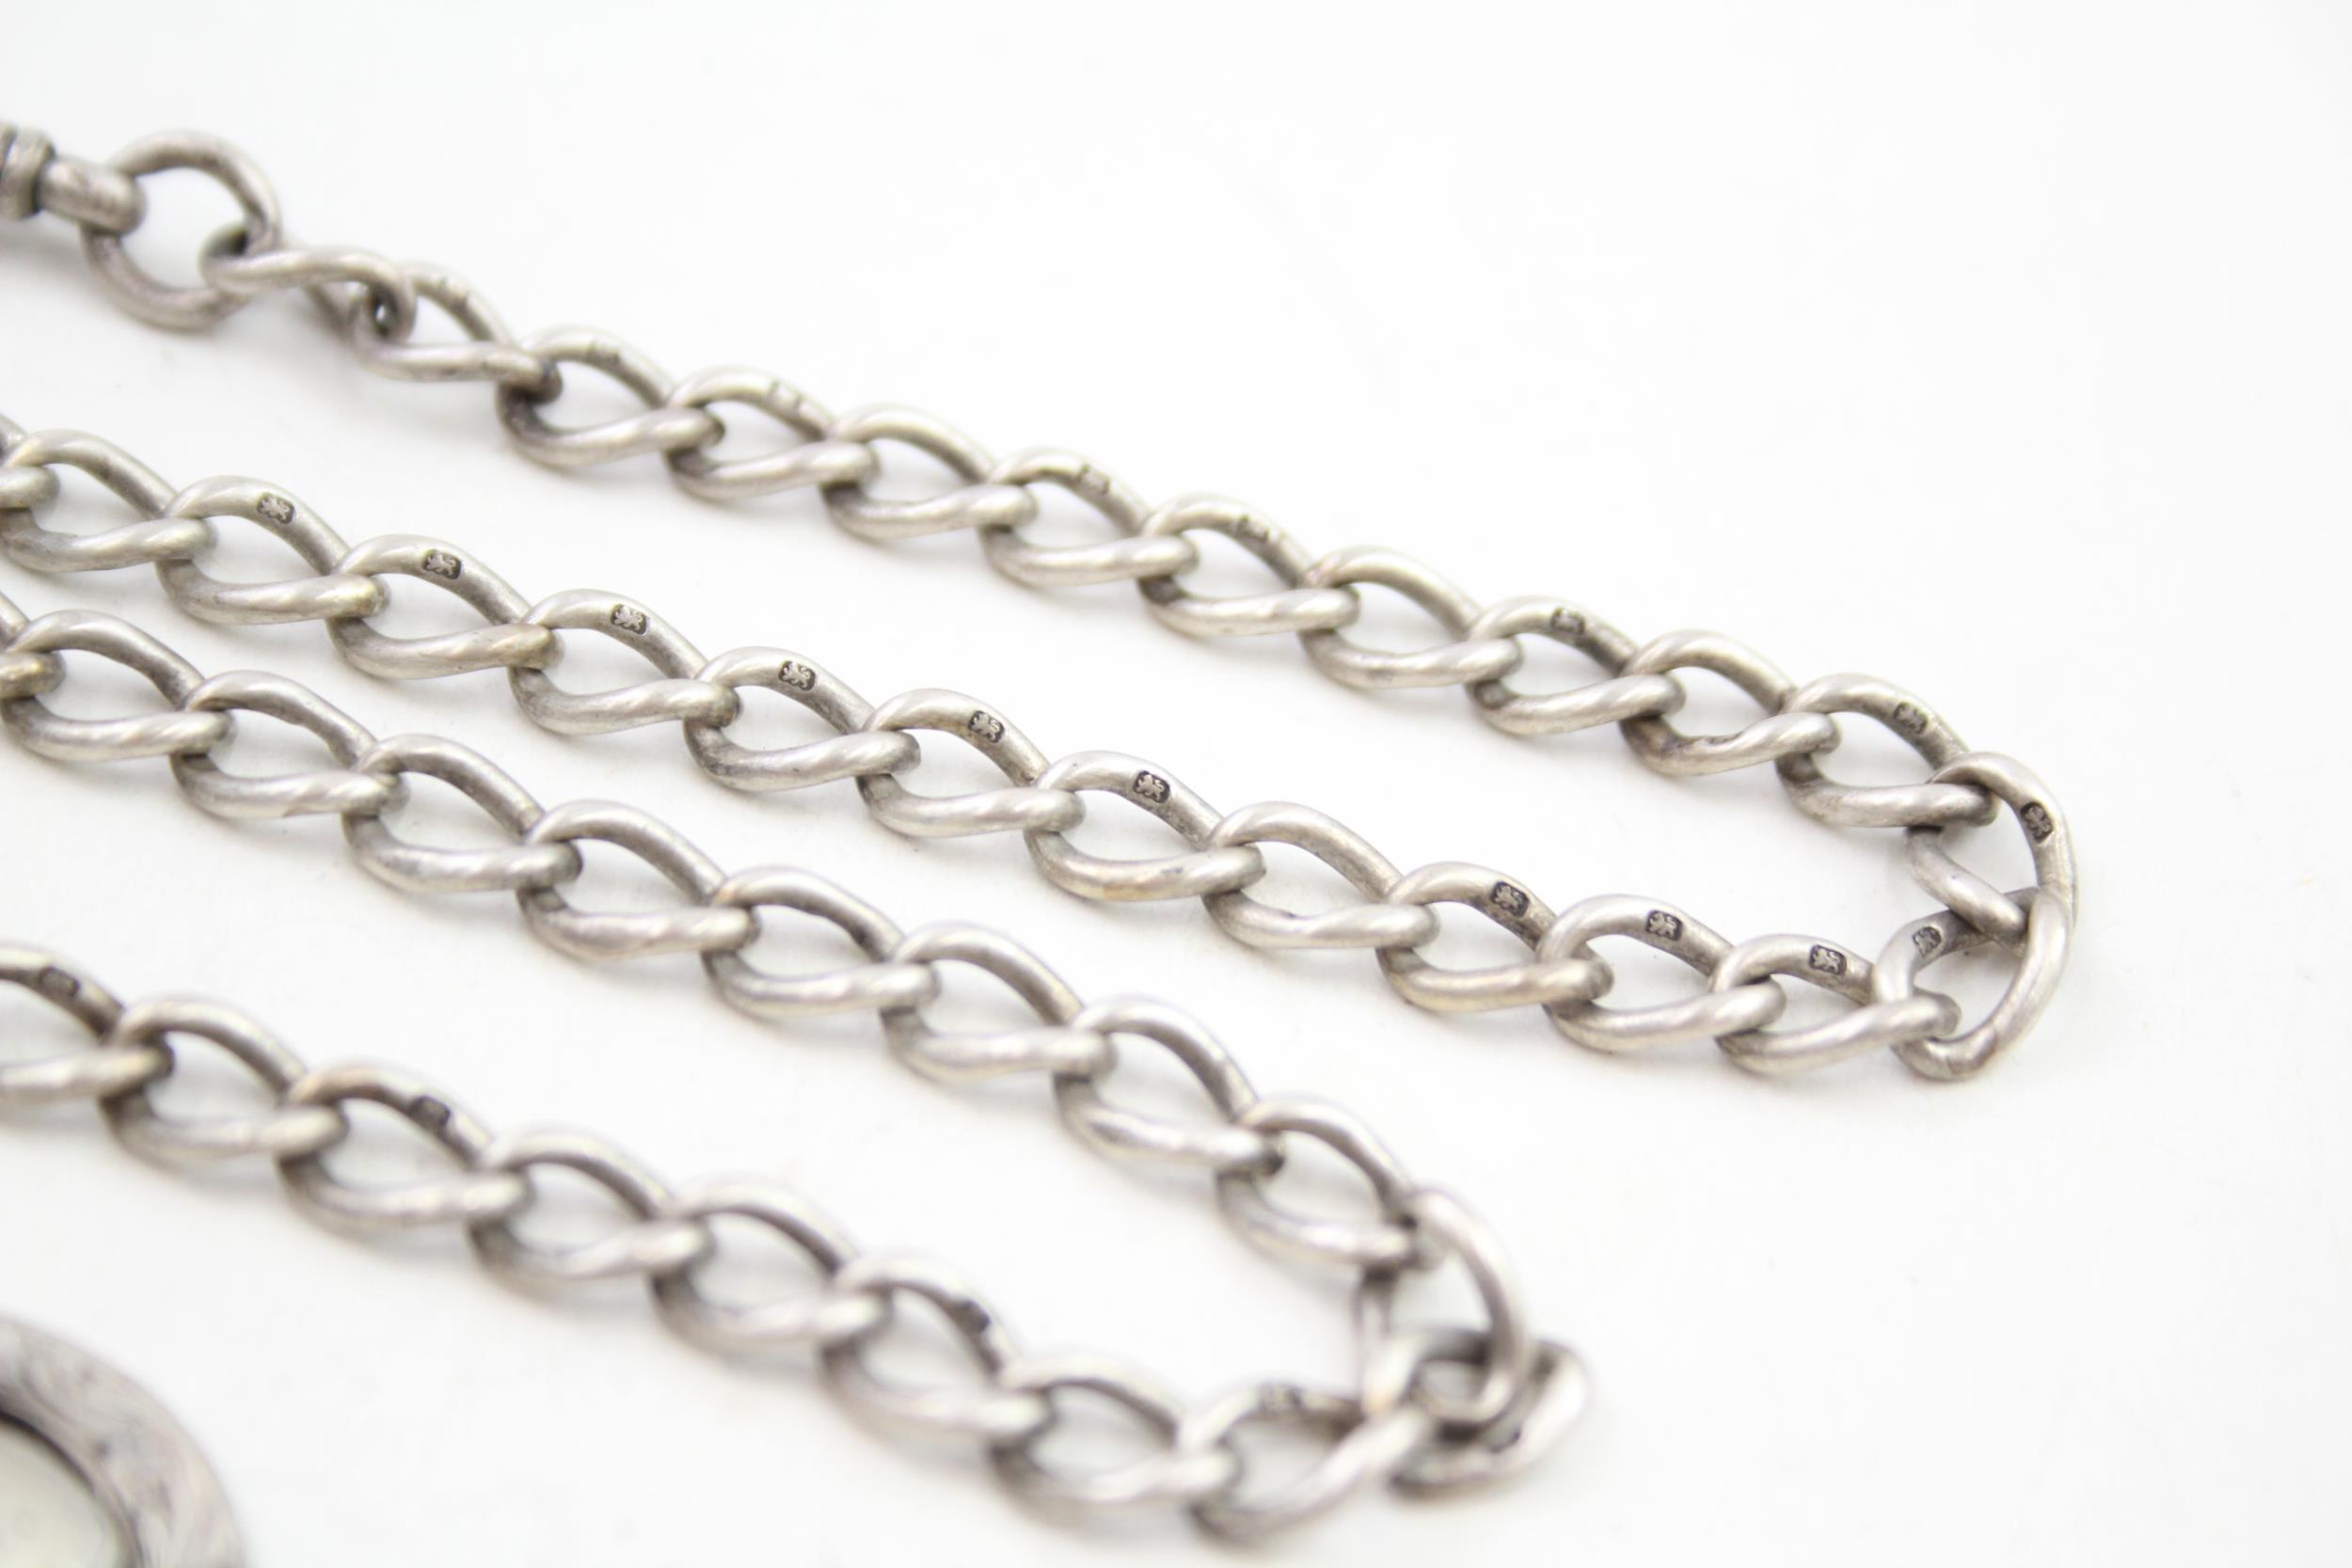 Antique Edwardian sterling silver watch chain and fob (48g) - Image 5 of 5